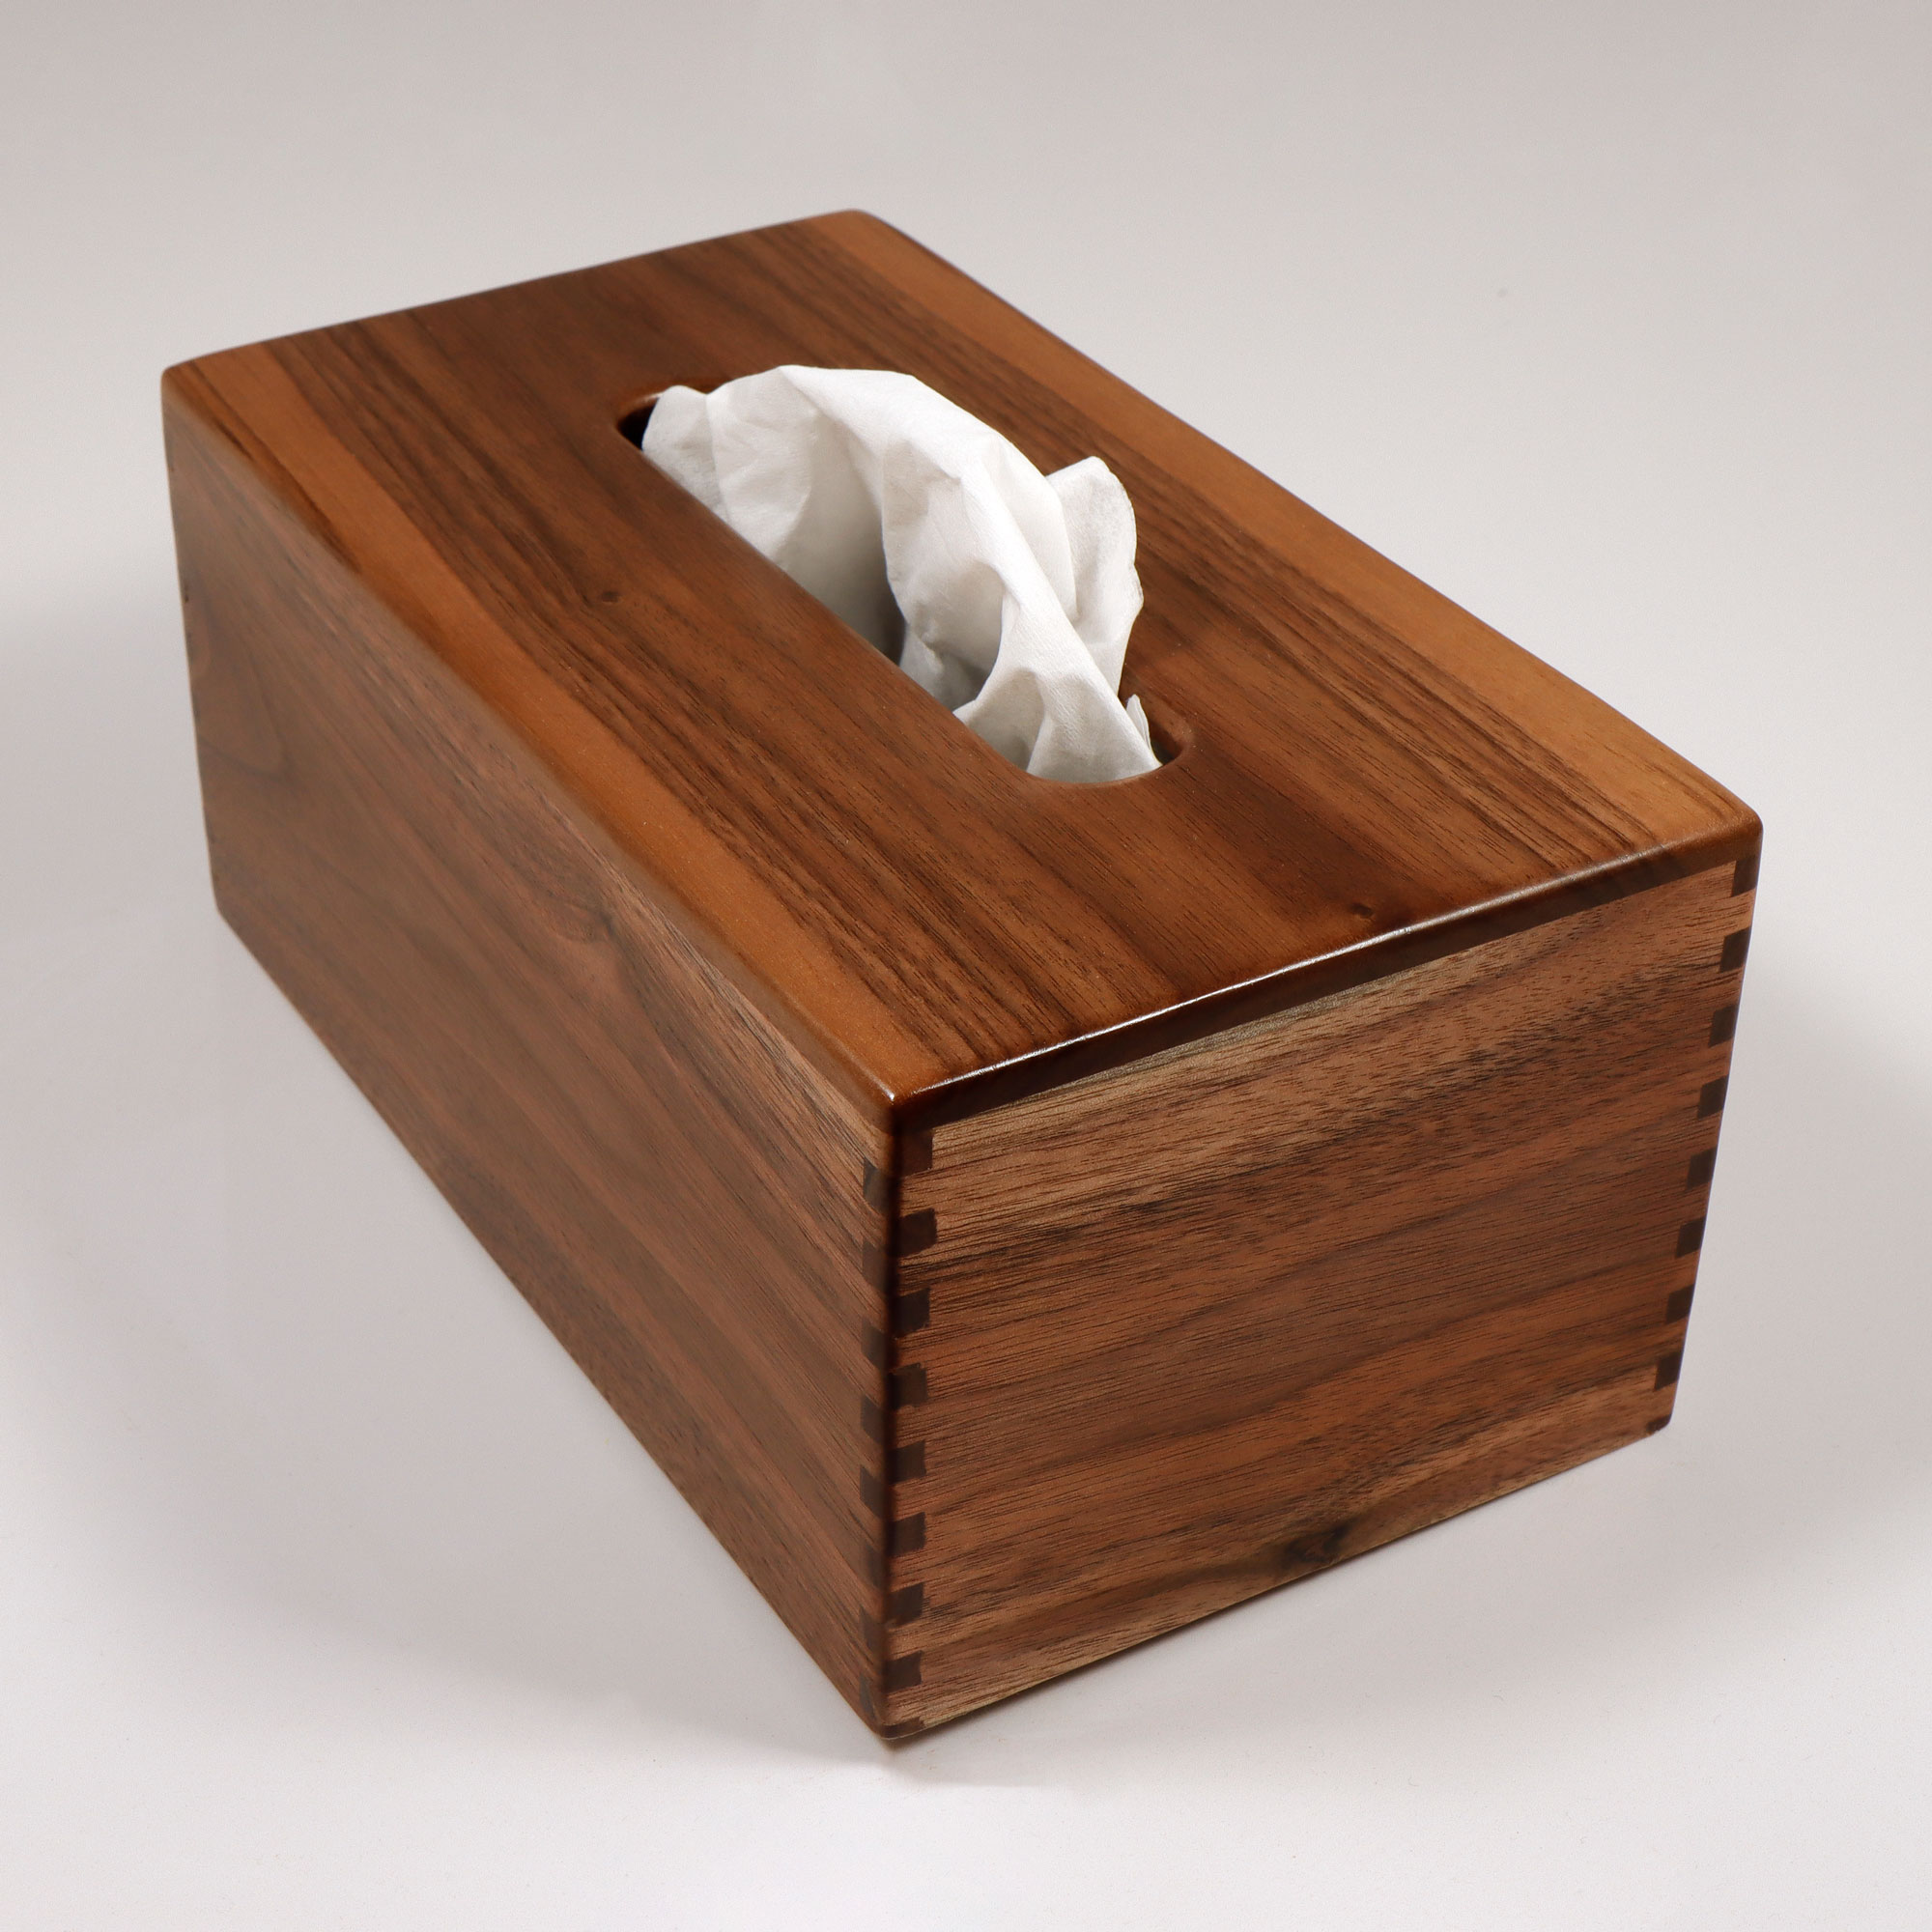 Solid Texas Black Walnut - Handmade Tissue / Kleenex Box Cover Holder -  Rectangle Style - Box Jointed Sides - Oak Knoll Woodworks